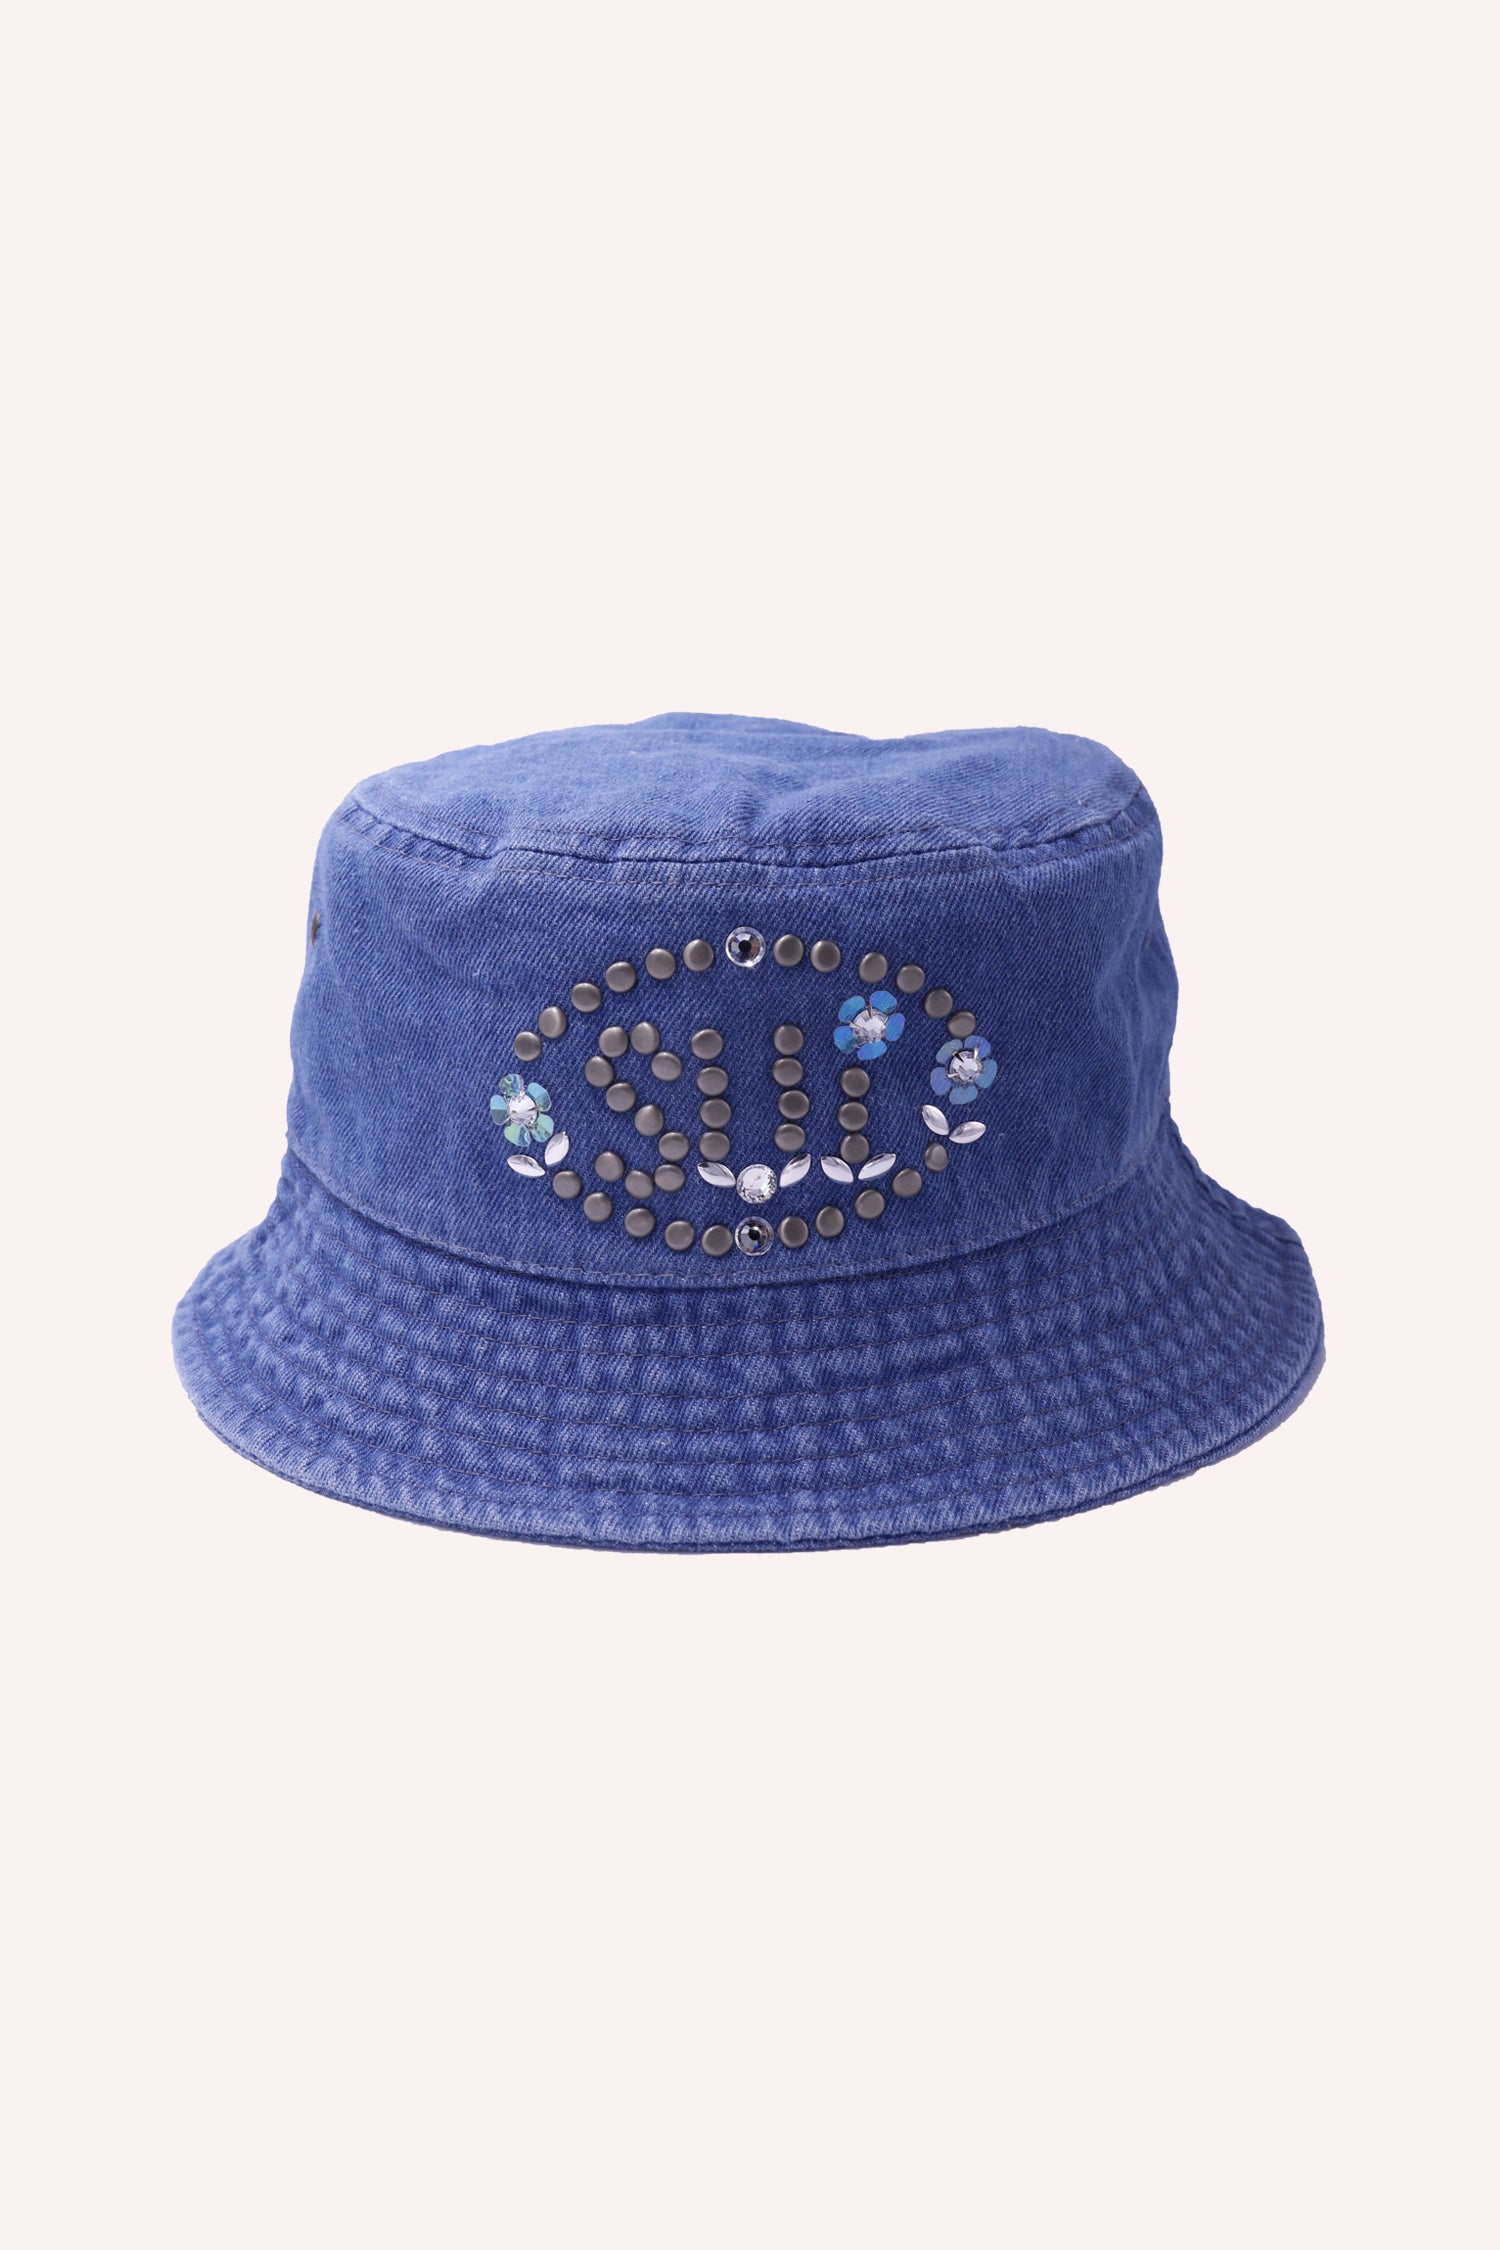 Studded Bucket Hat Denim, Sui logo in an oval, U I with floral bottom, I with a floral dot